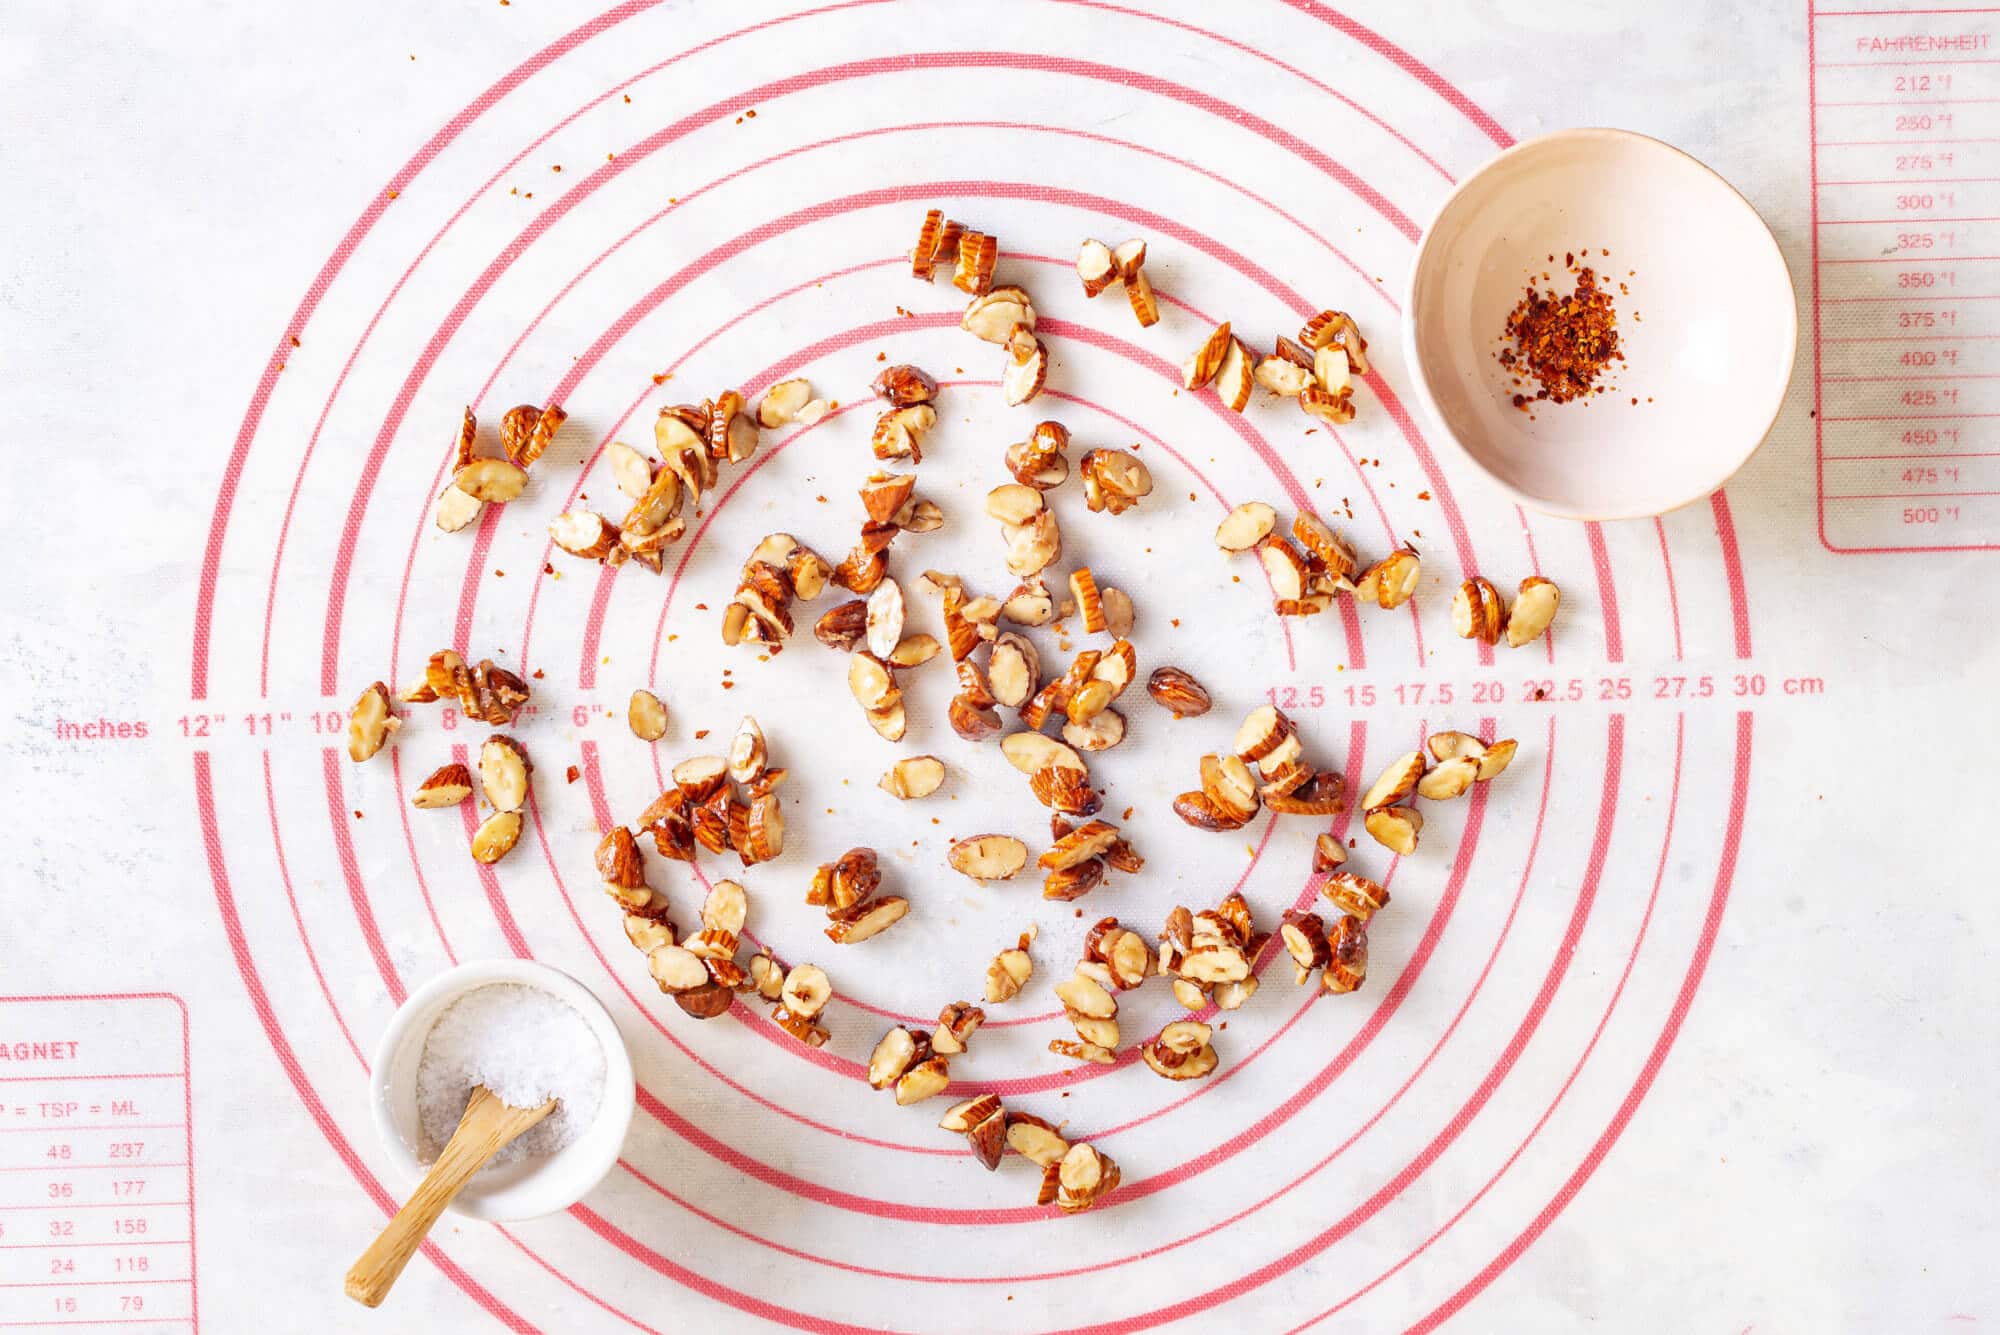 Chopped almonds on a baking tray with a bowl of salt and a bowl of chili flakes on the side.